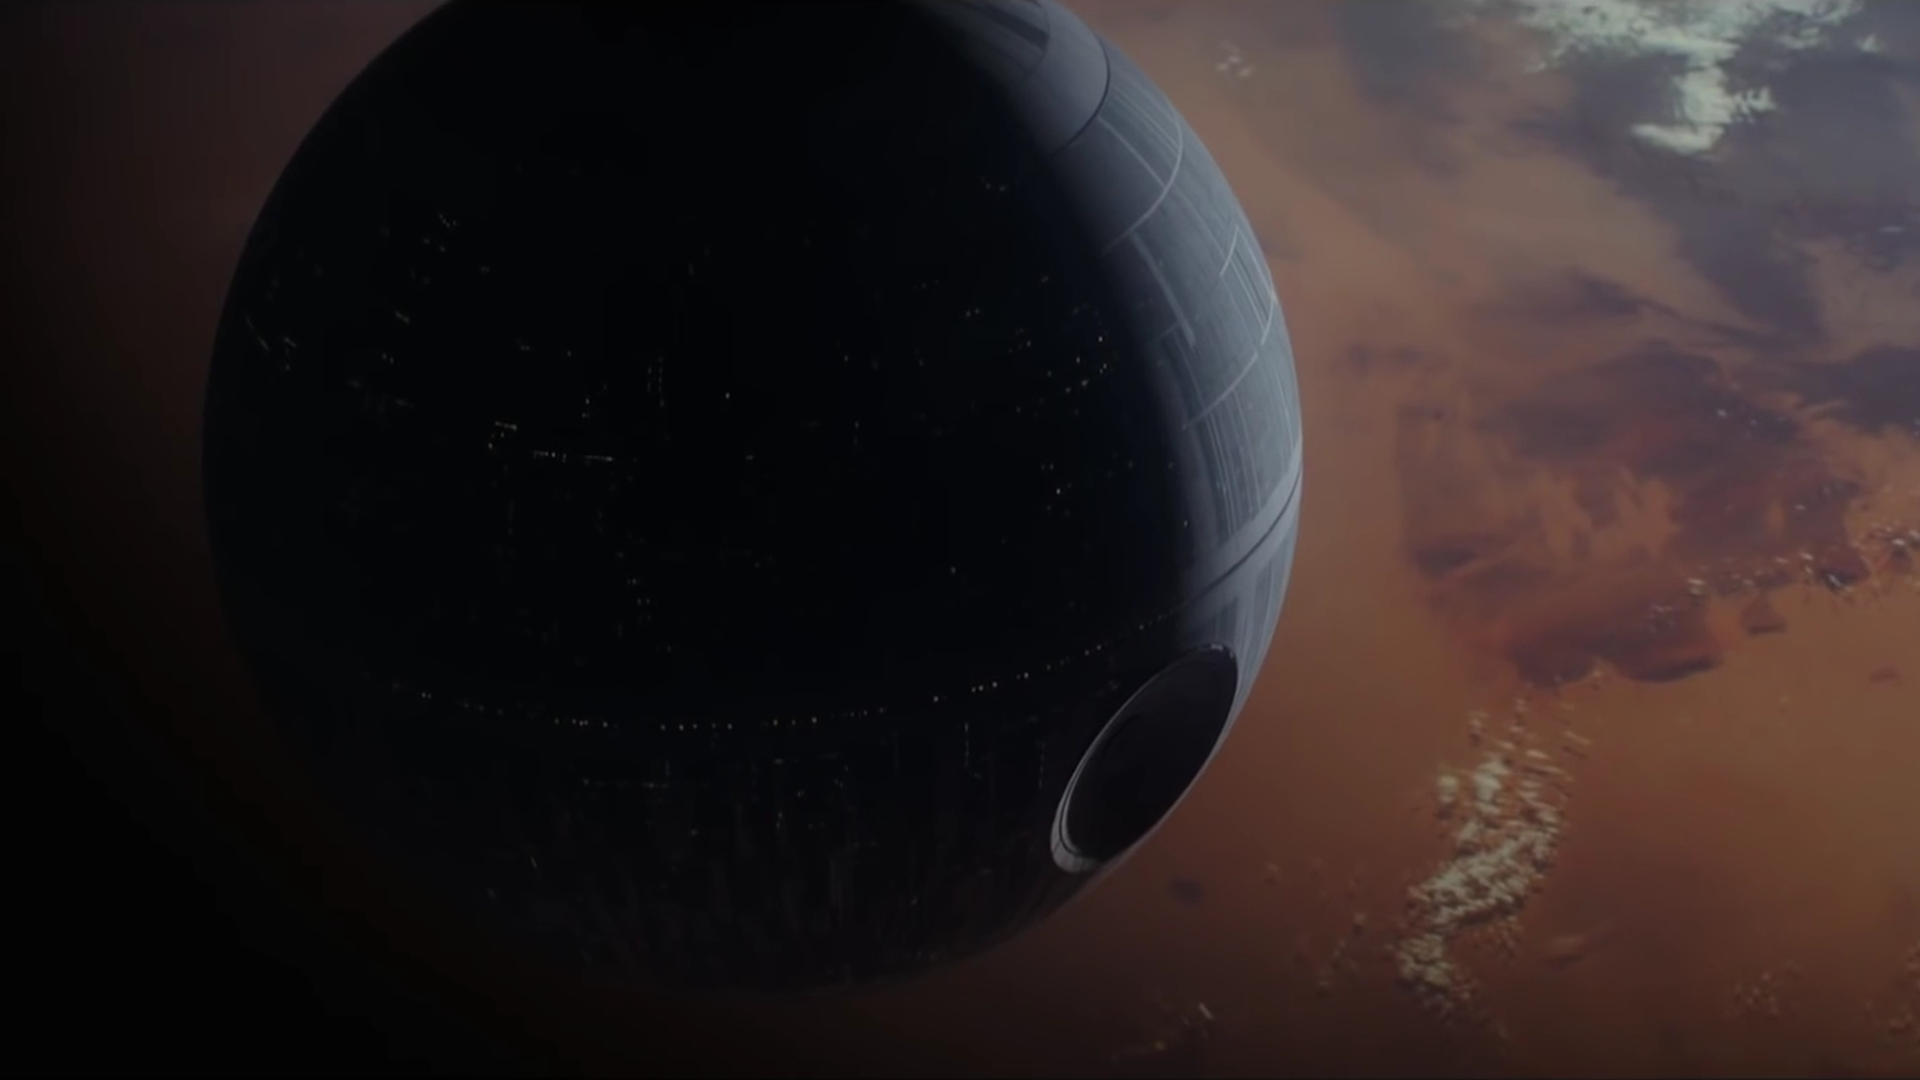 Death Star Wallpaper Collection